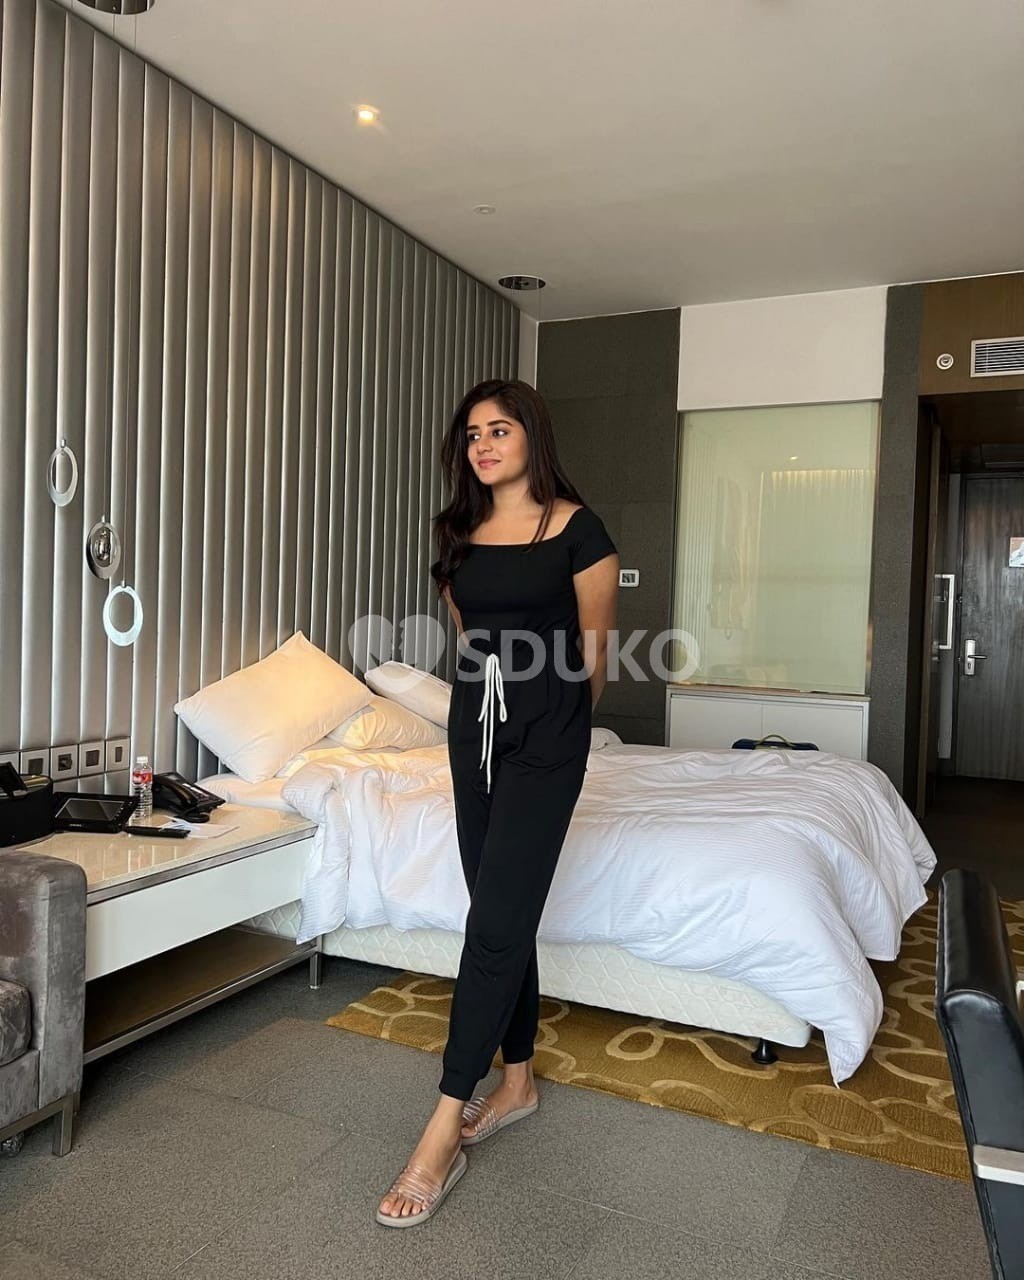 Dwarka 💯  Full satisfied independent coll girls 24 hours available